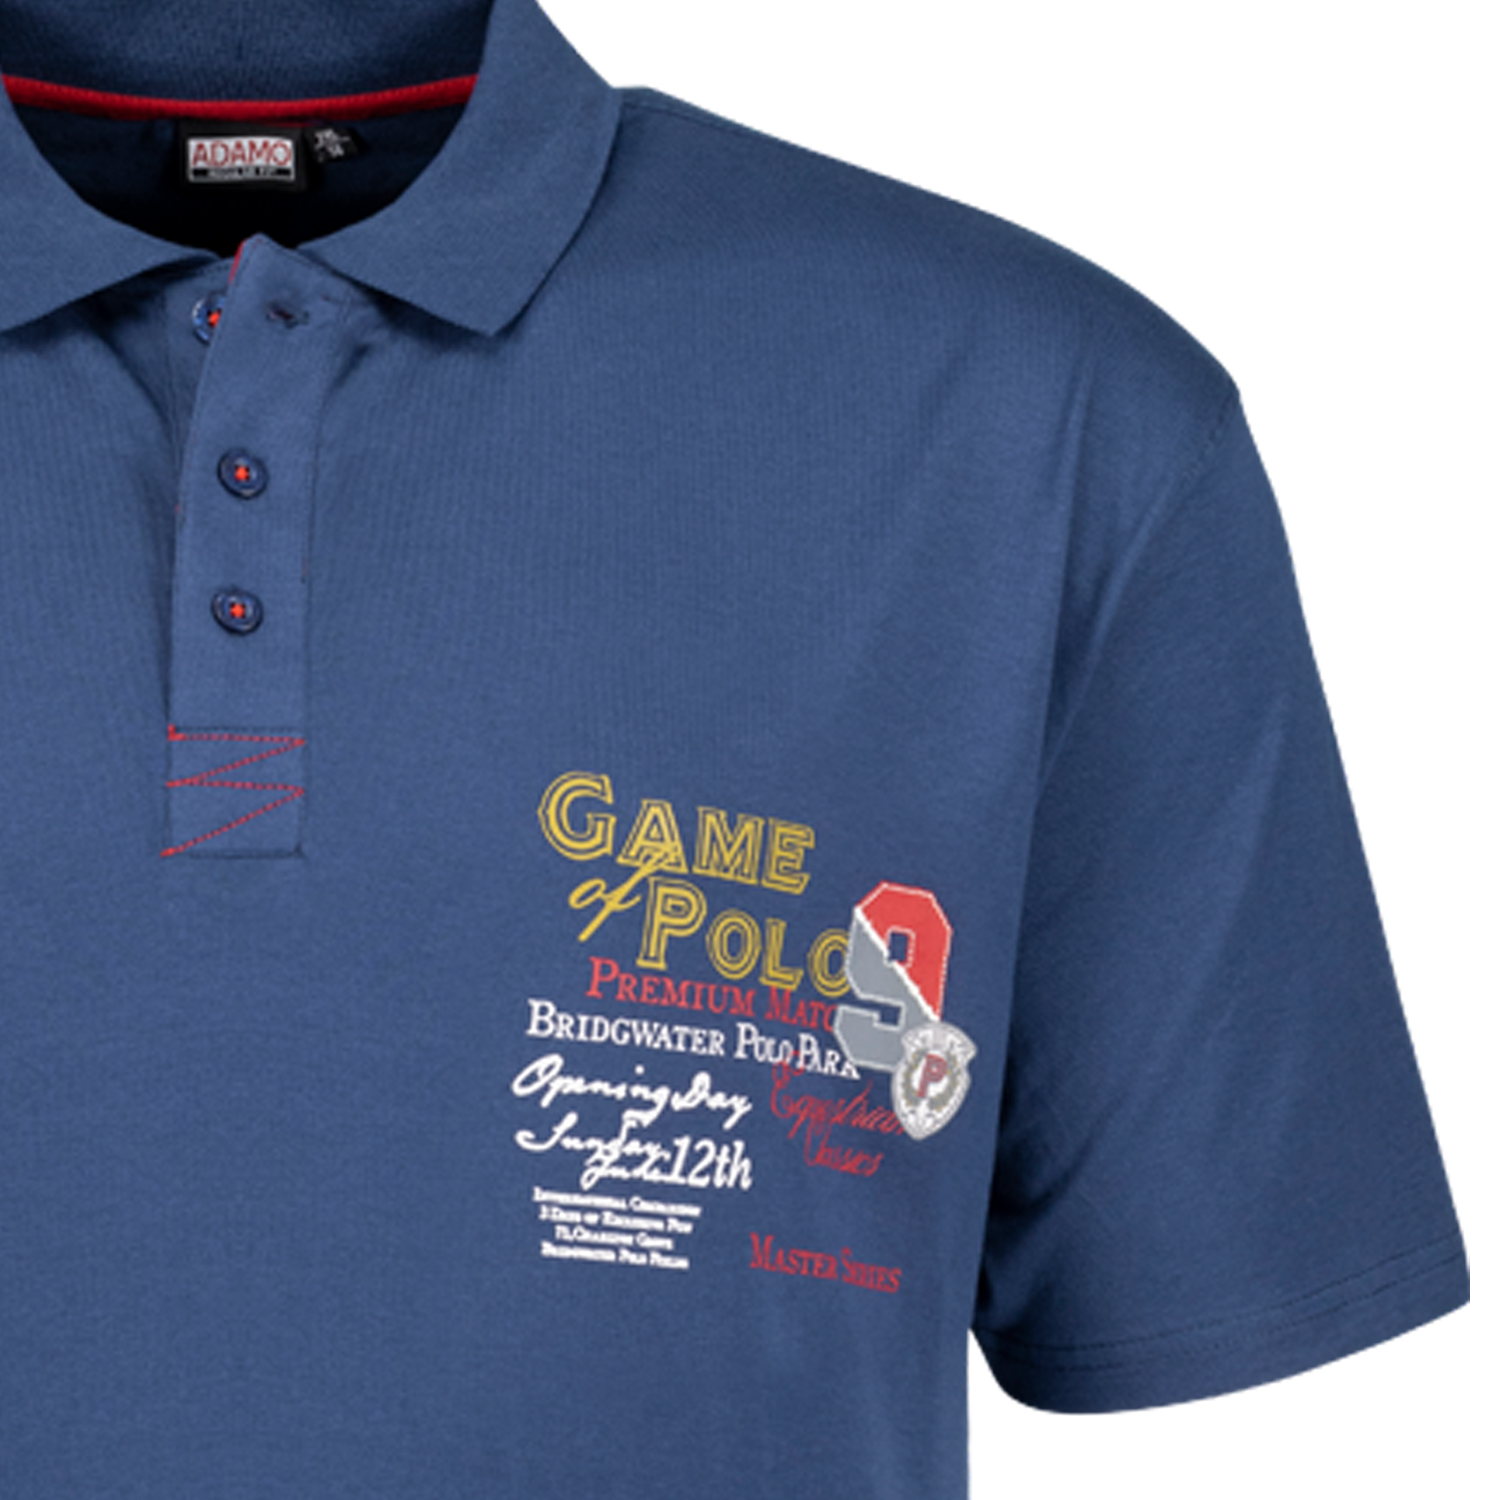 Short sleeve polo shirt with print REGULAR FIT series Perth by Adamo in admiral blue up to oversize 12XL